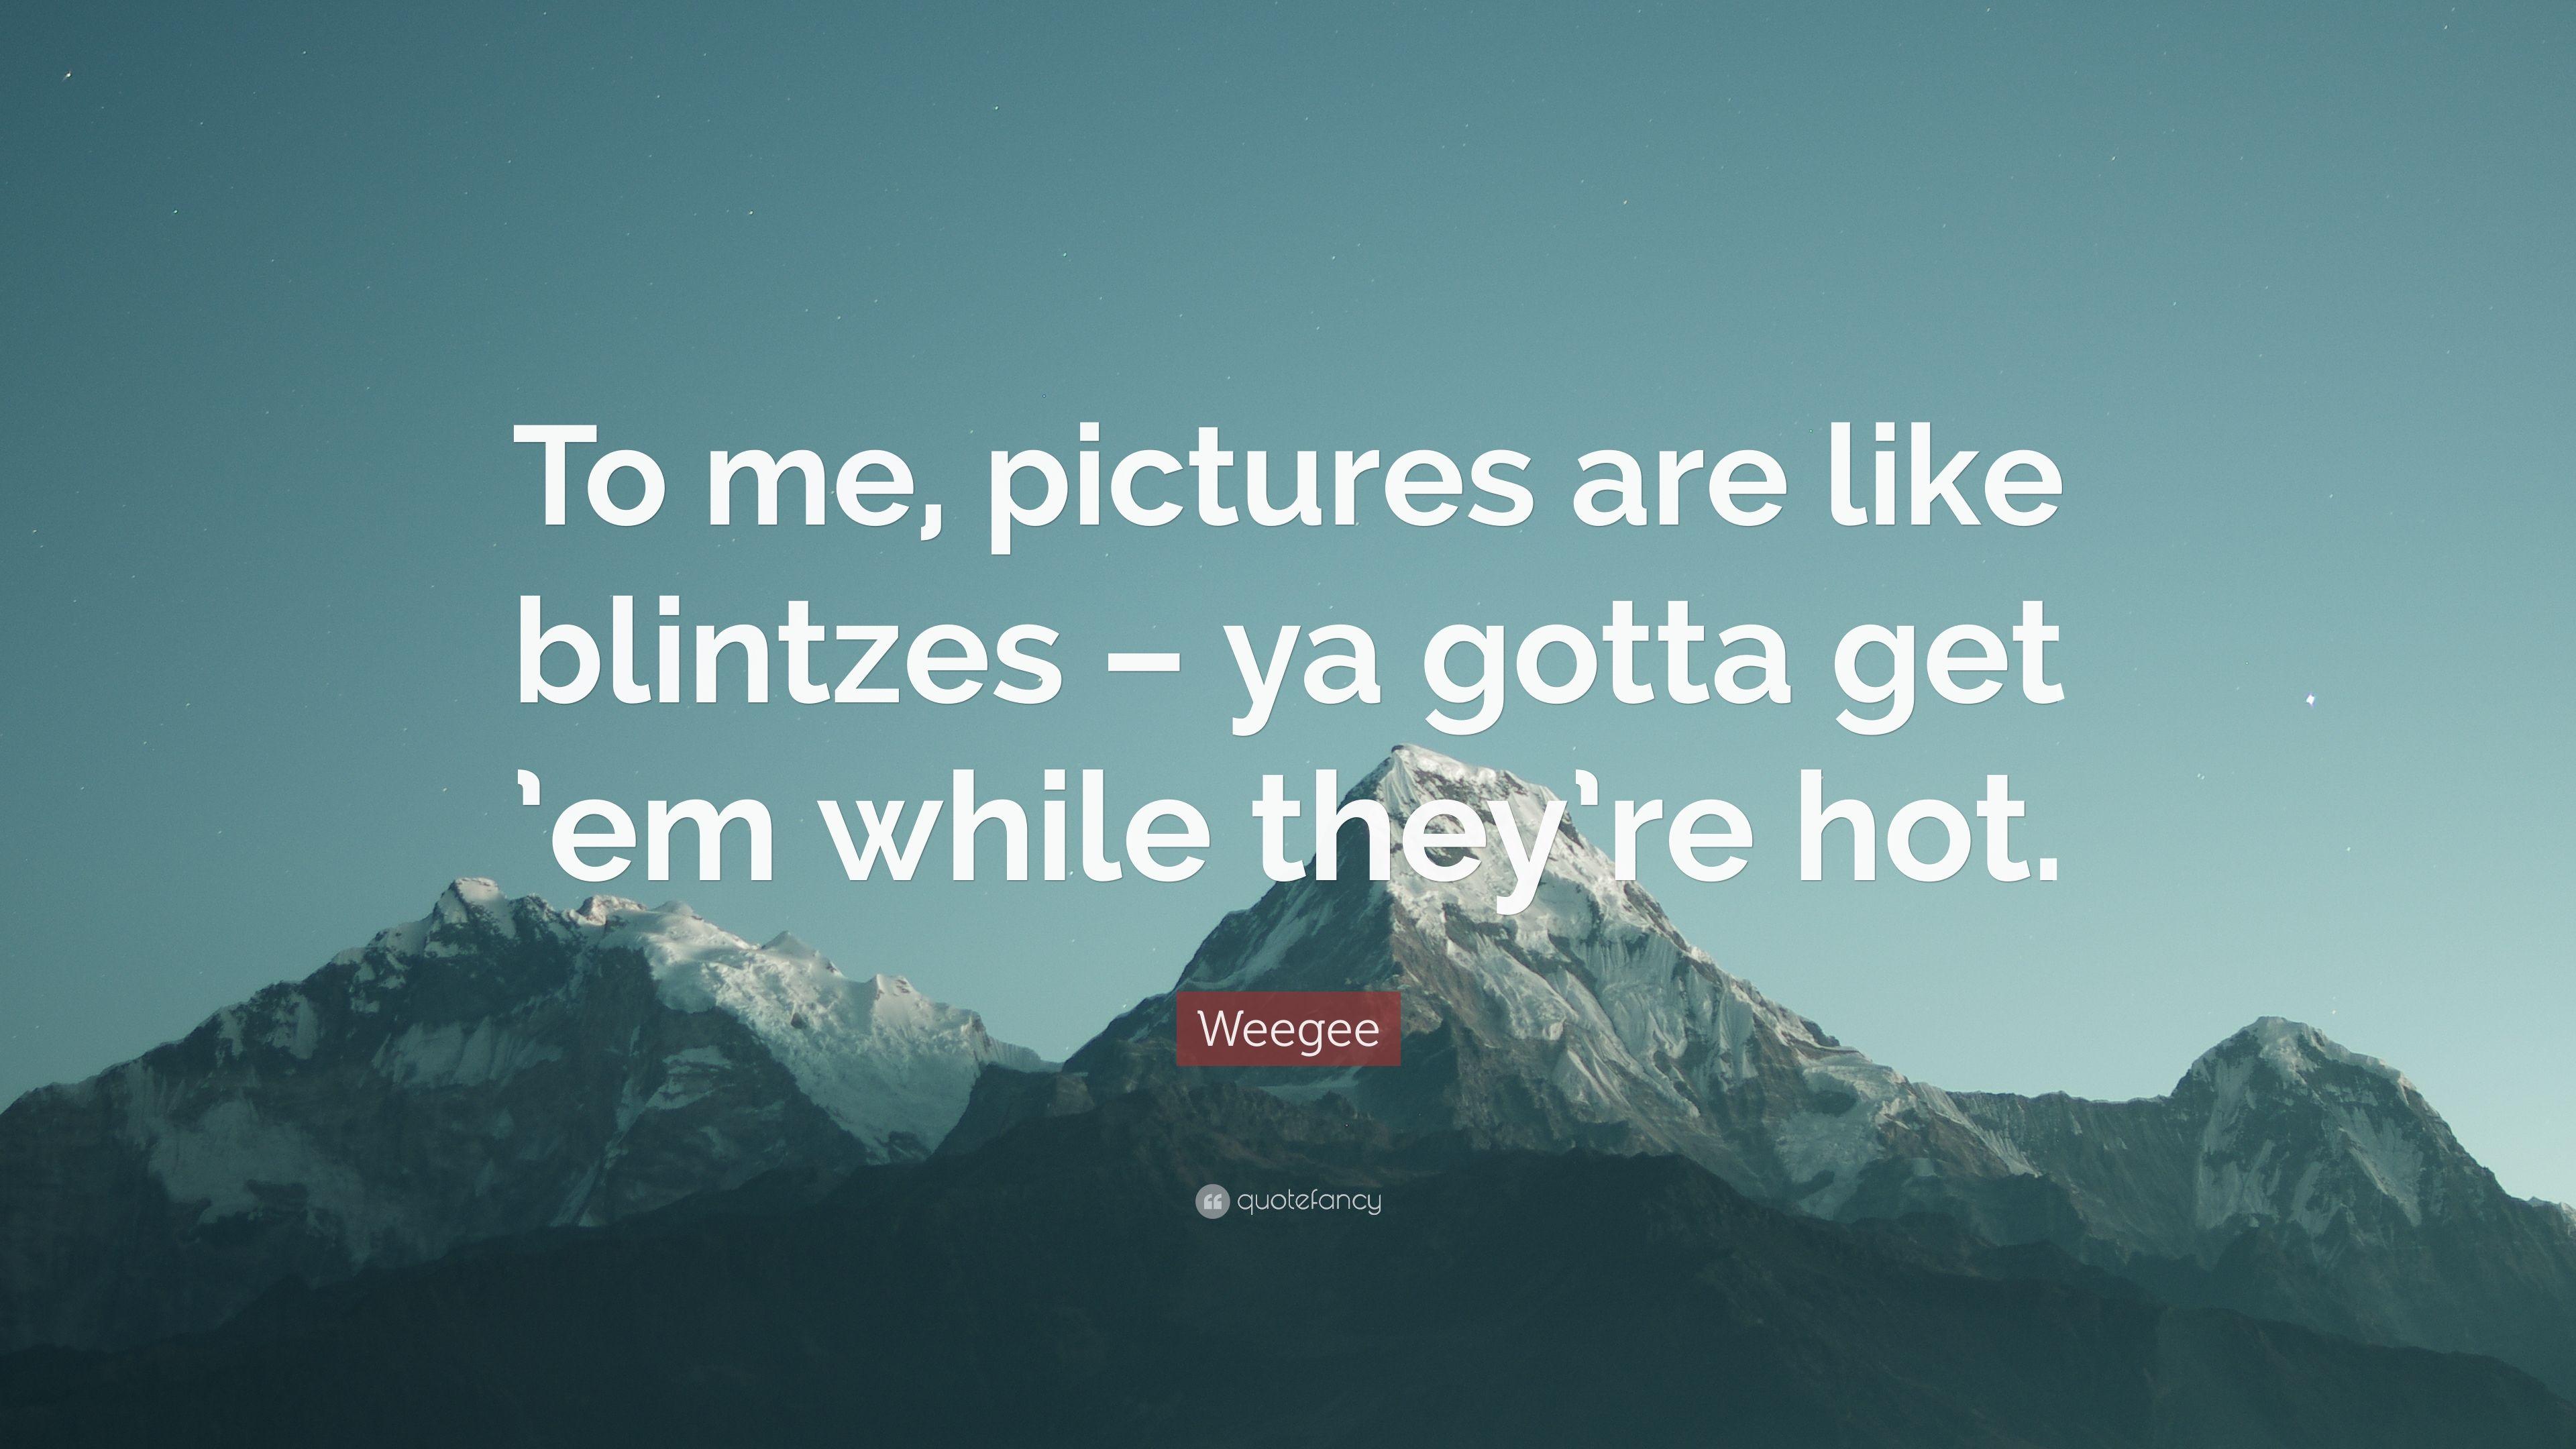 Weegee Quote: “To me, picture are like blintzes